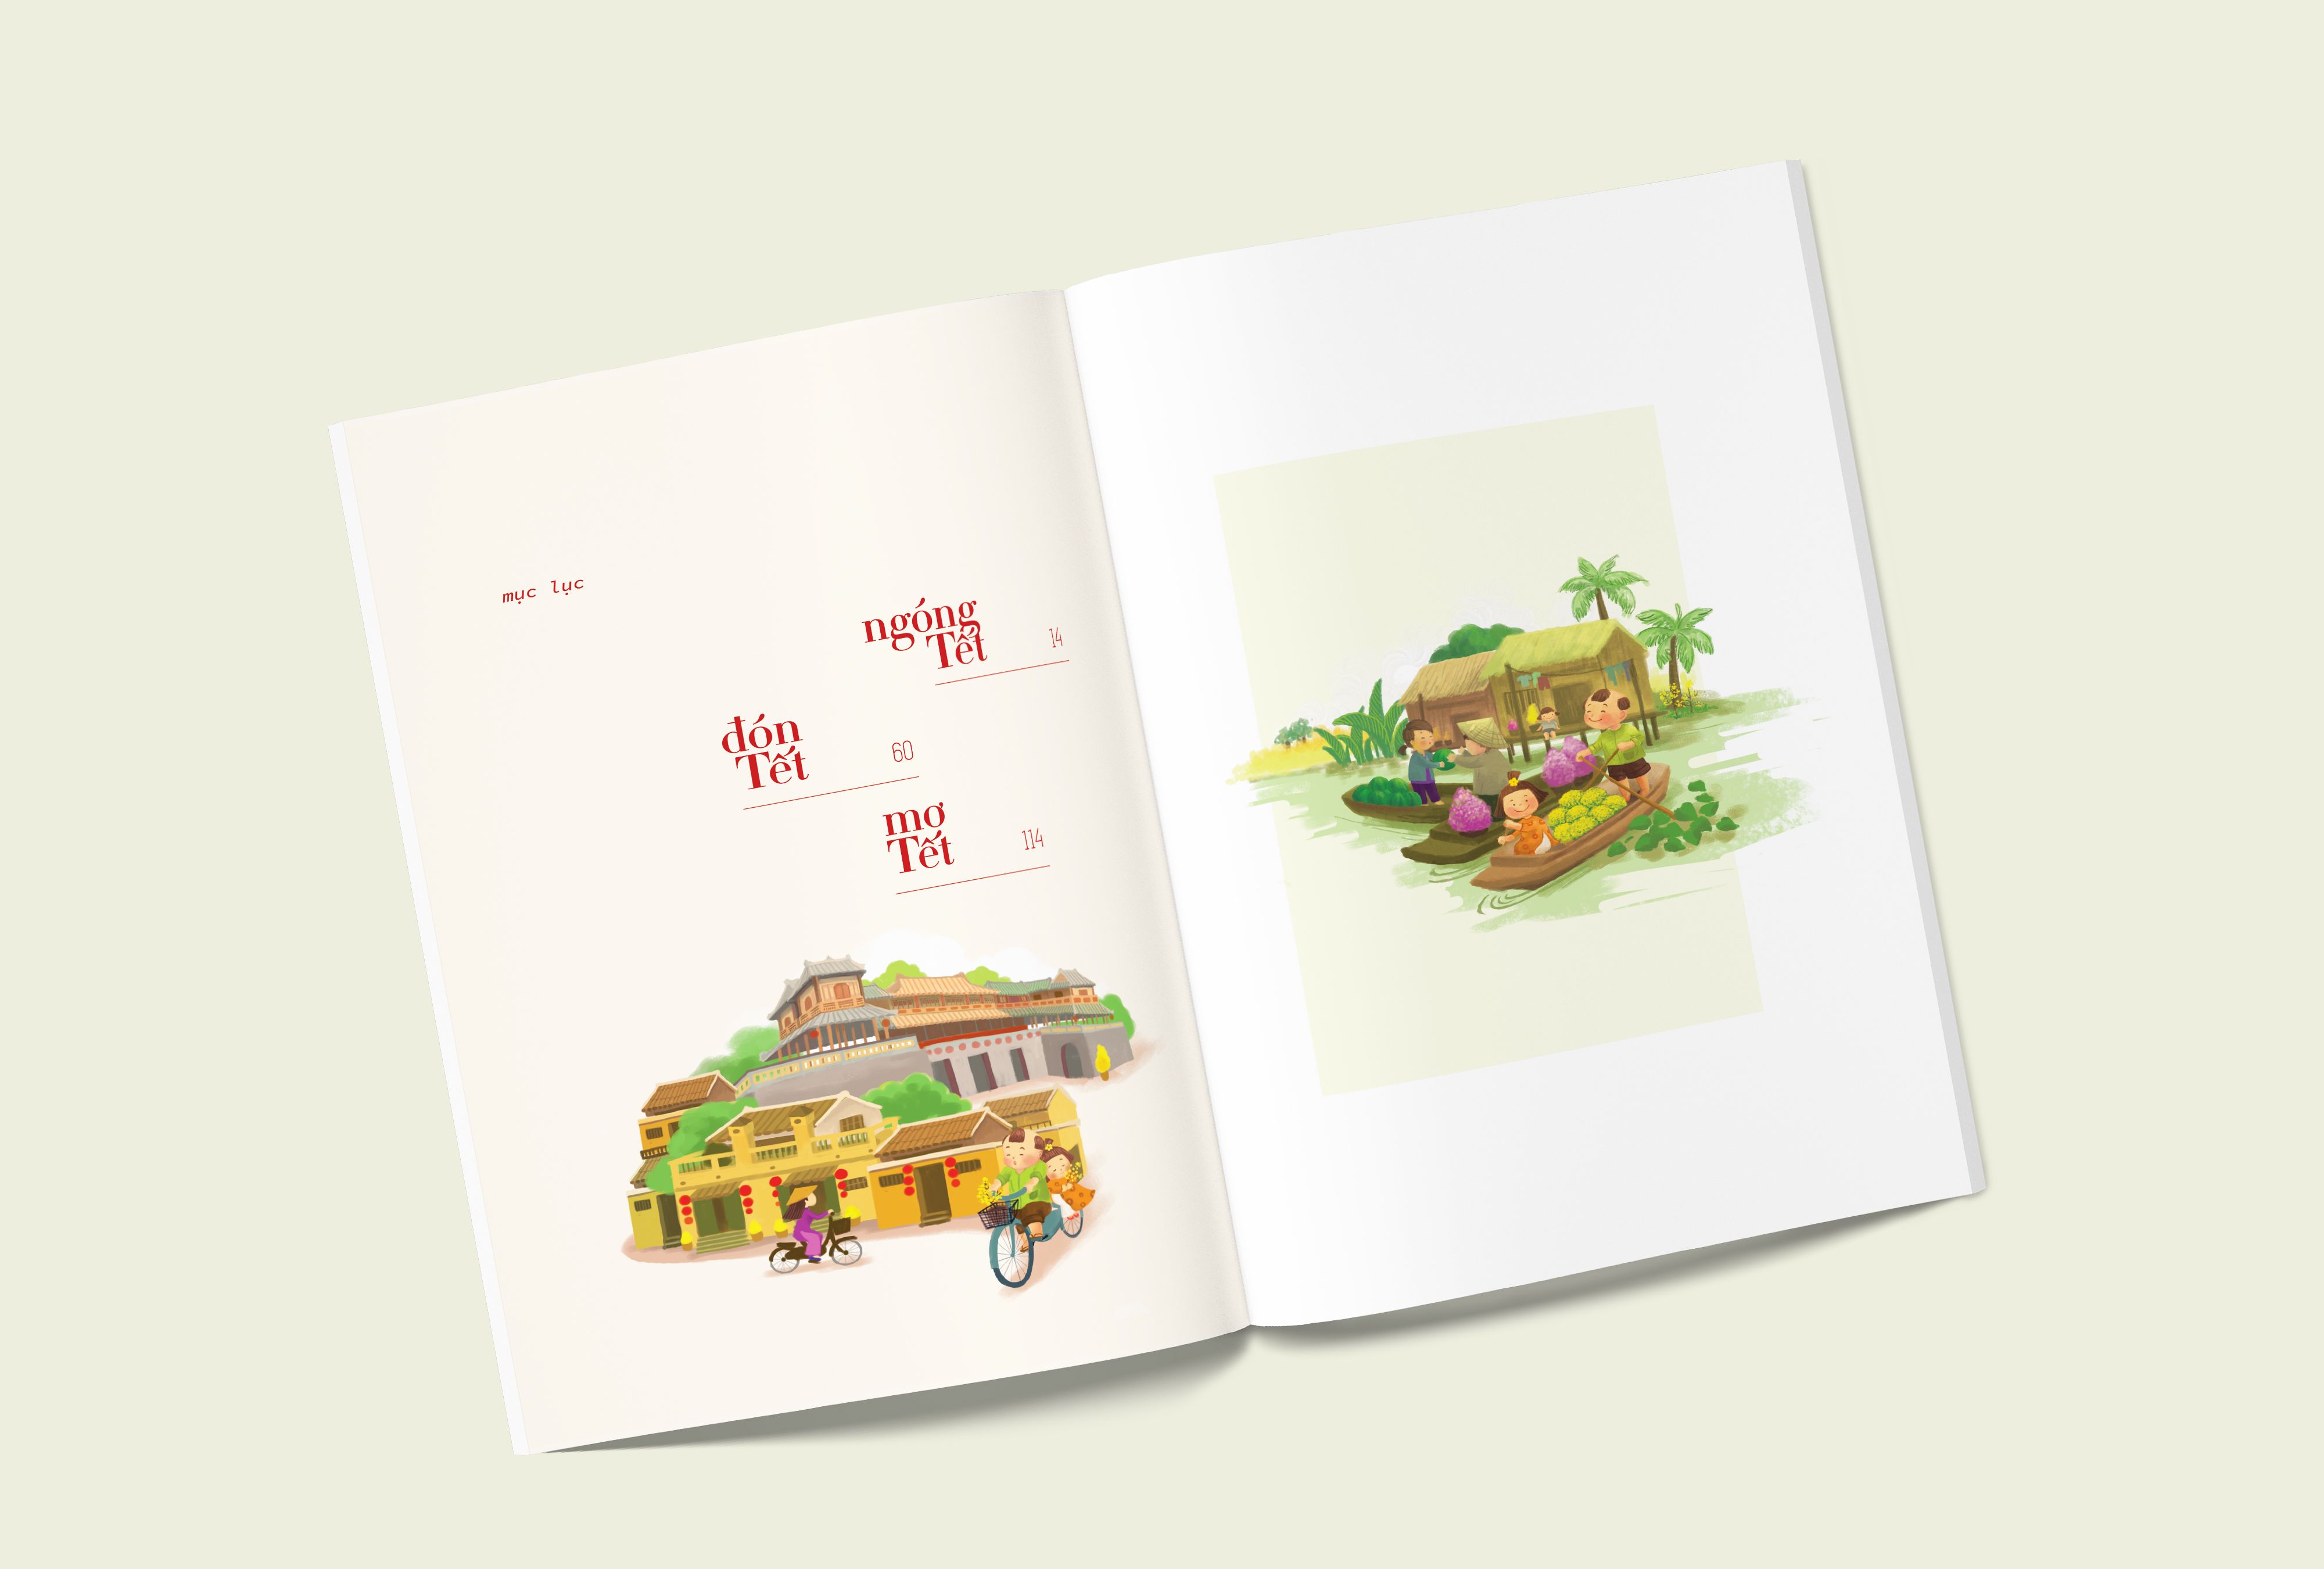 The issue “Vui nhu Tet” contains 144 pages divided into 12 articles on three topics: “Ngóng Tết” (Tet expectation), “Đón Tết” (Tet celebration) and “Mơ Tết” (Tet dream). 